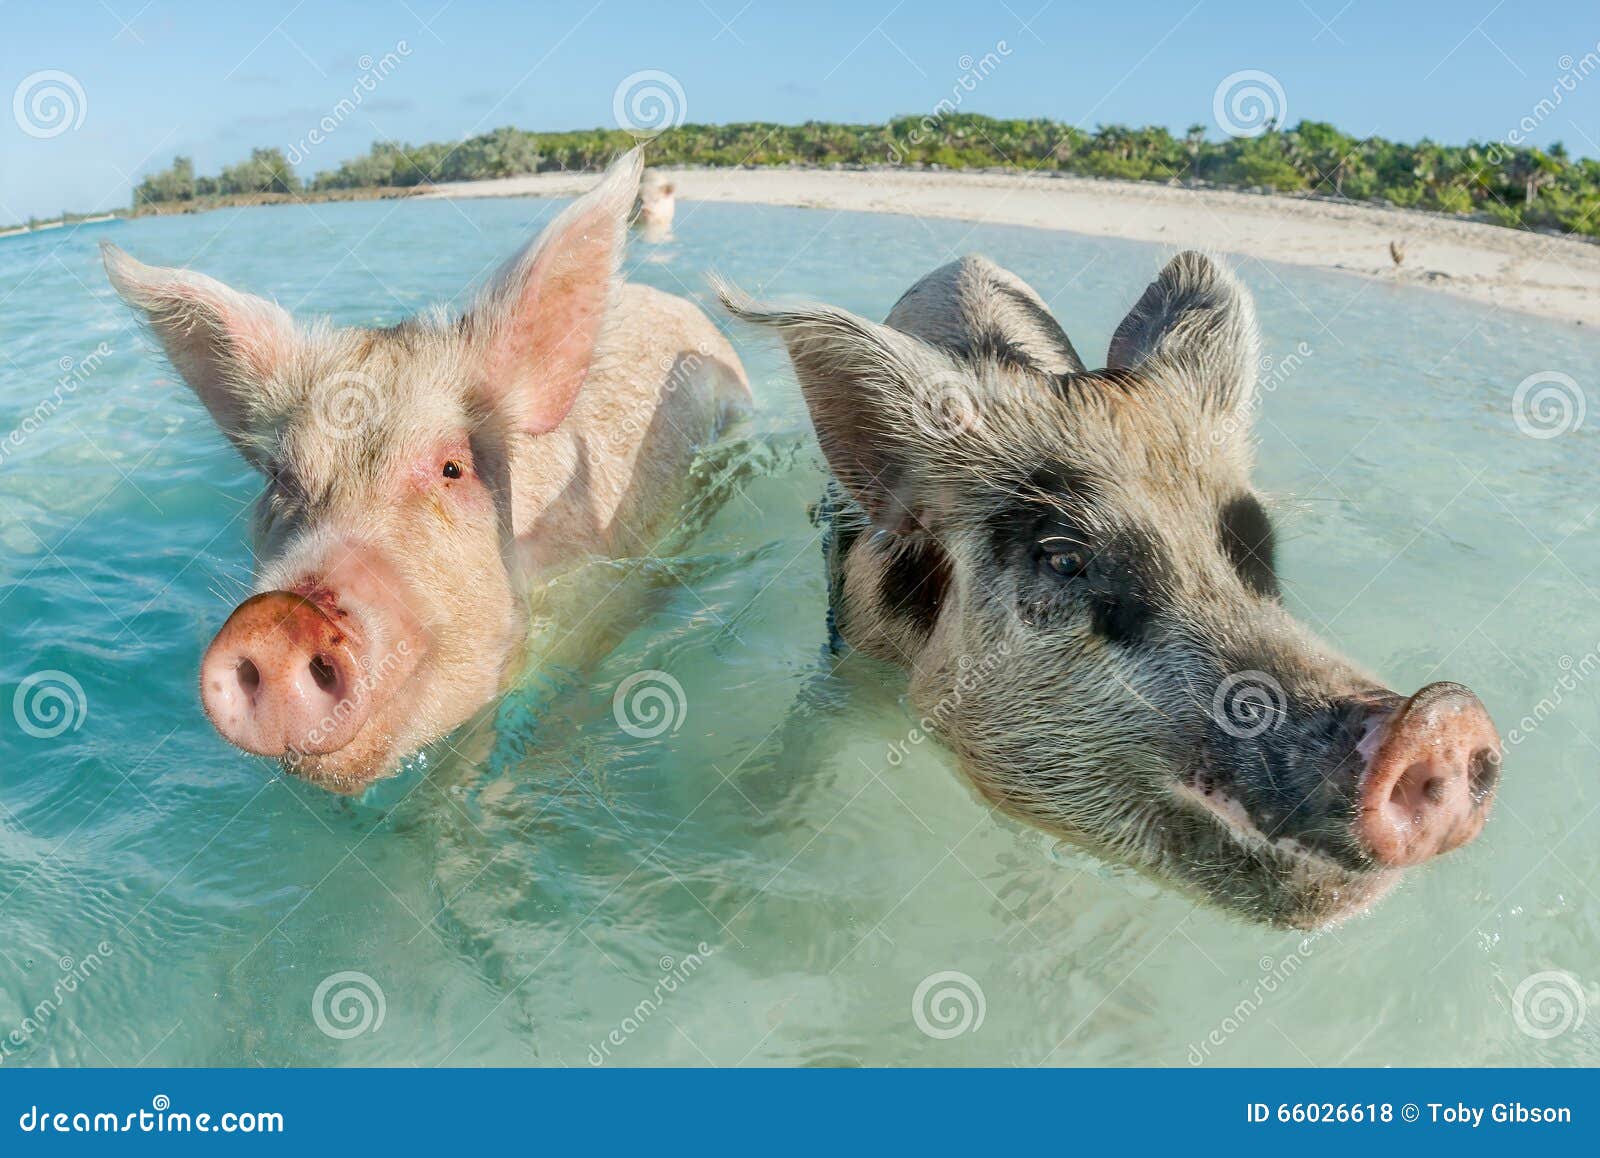 two pigs swimming in the bahamas